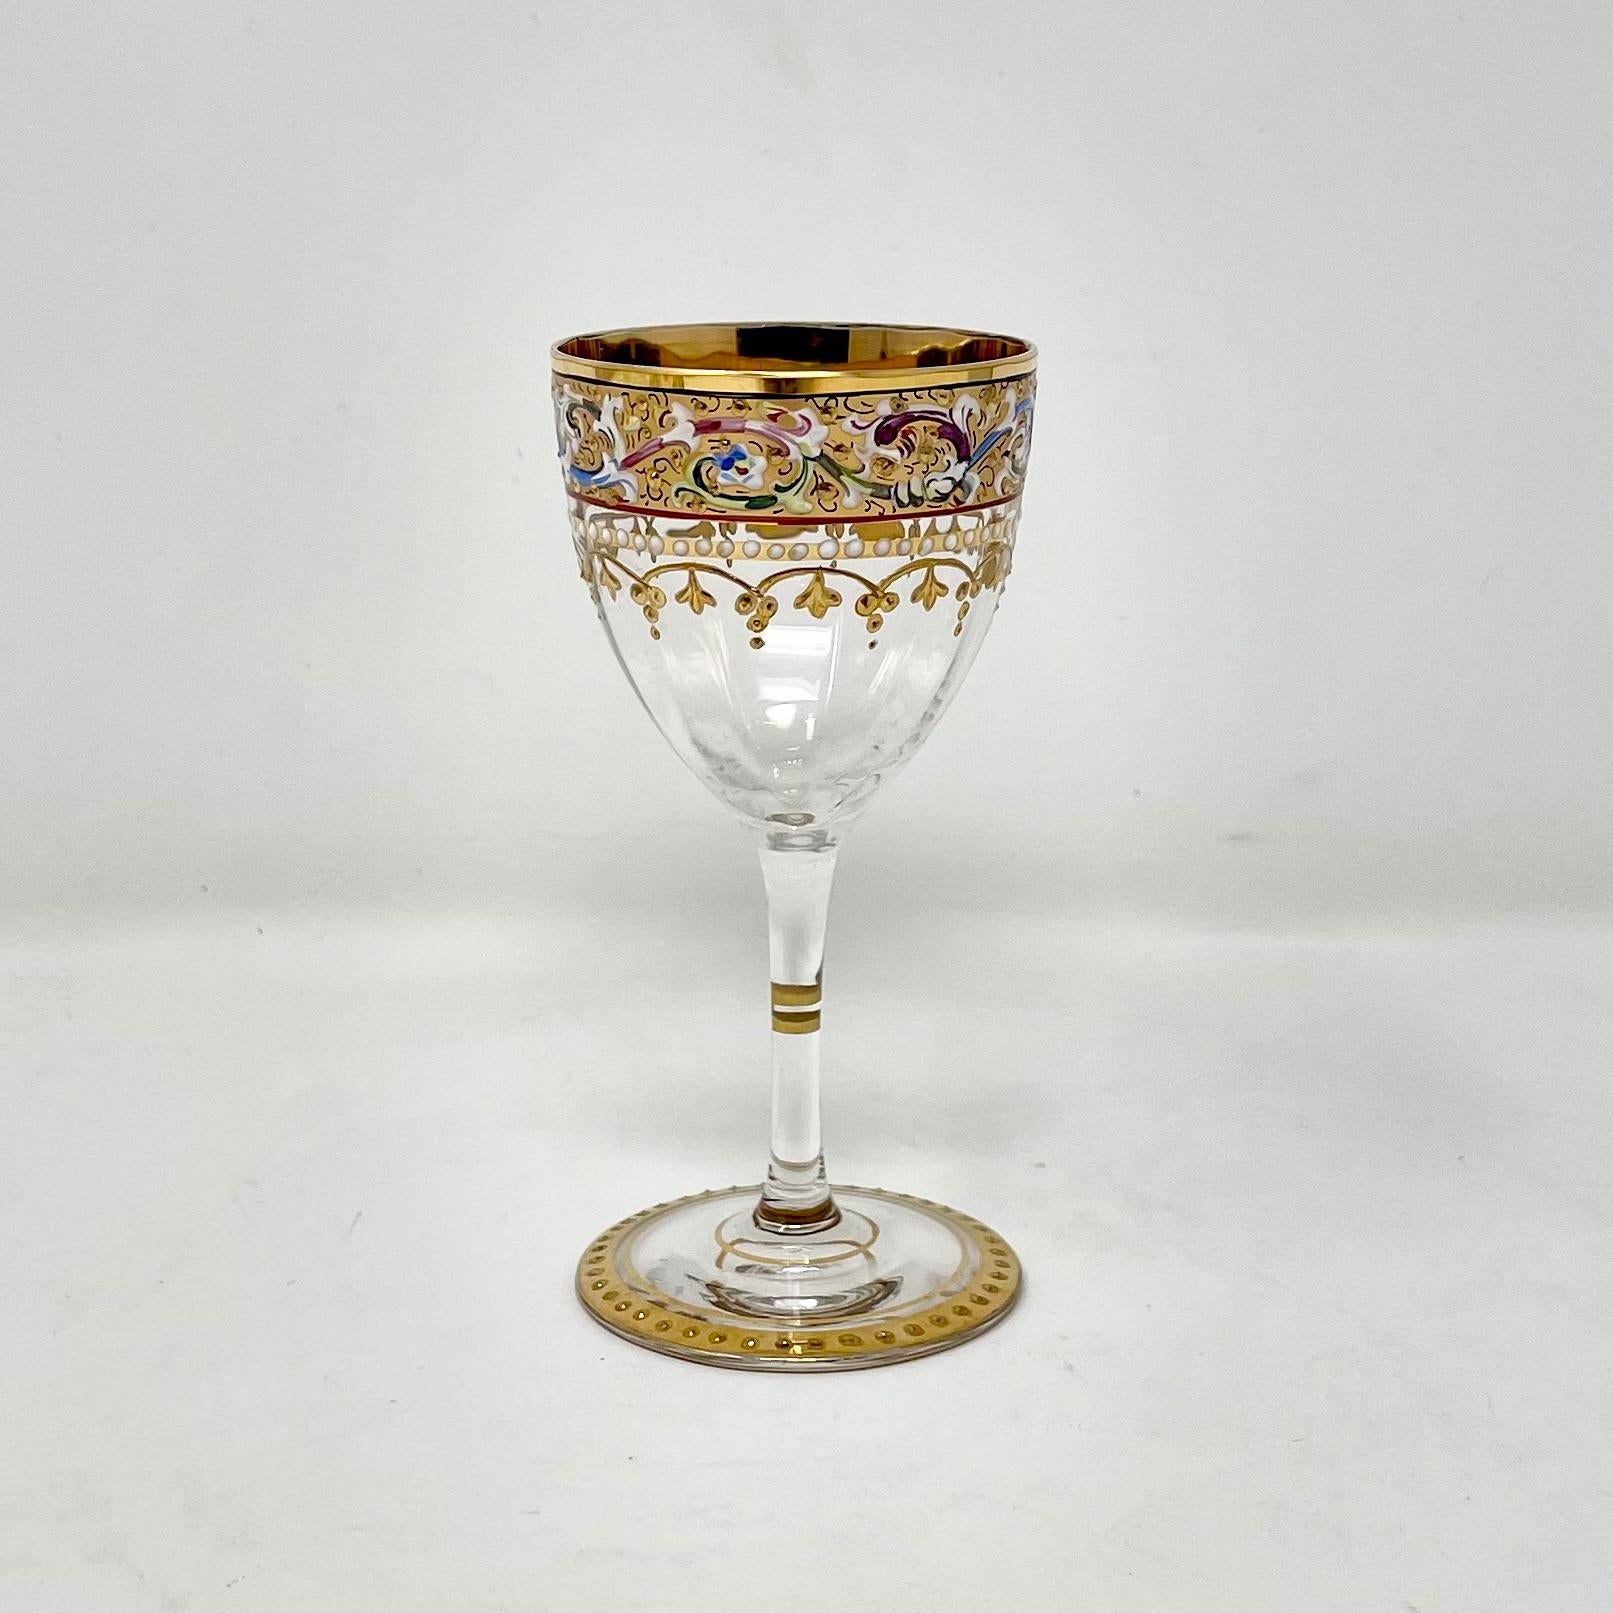 Set of 8 antique Austrian Moser glass hand-painted cordial glasses with gold leaf, circa 1890's.
Exquisite colors and workmanship.